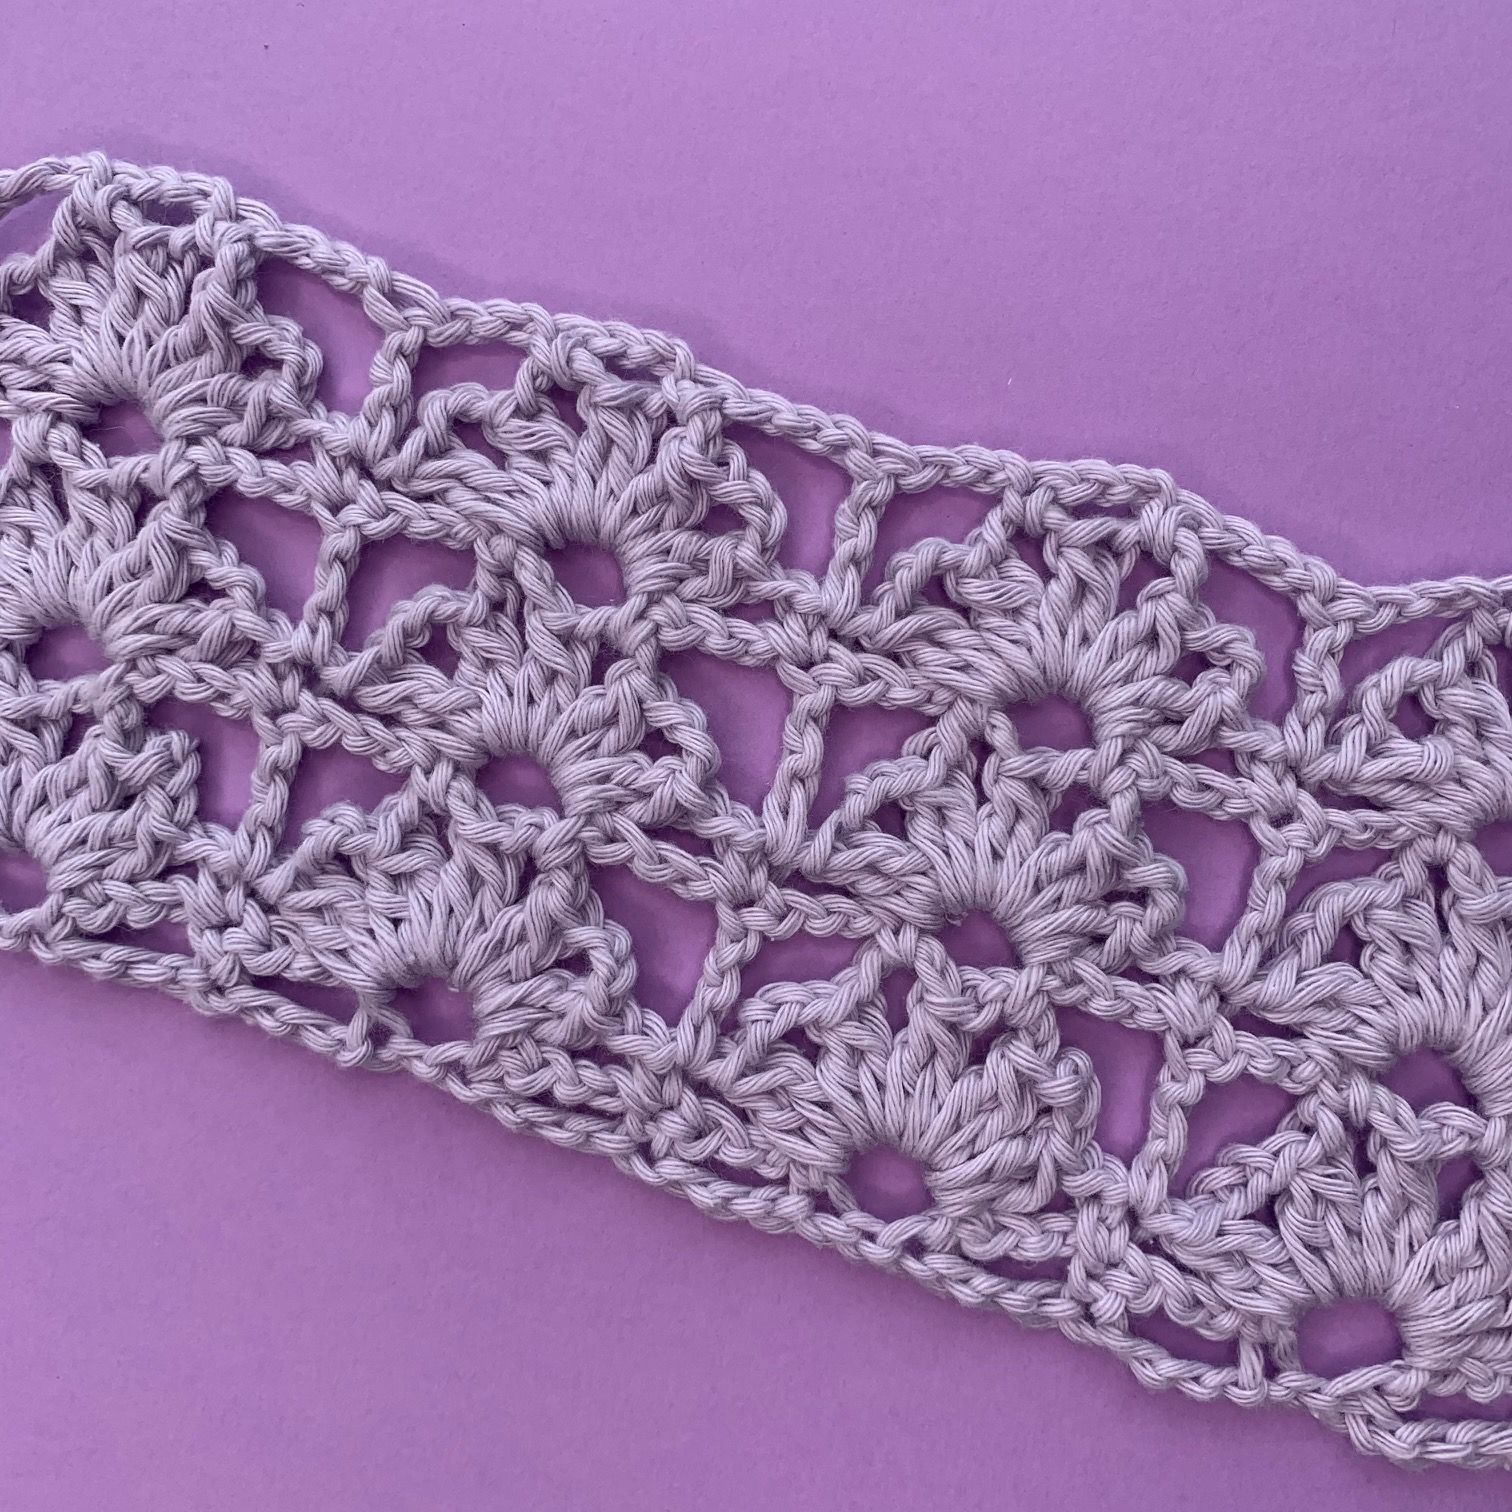 How to Crochet Flame stitch pattern